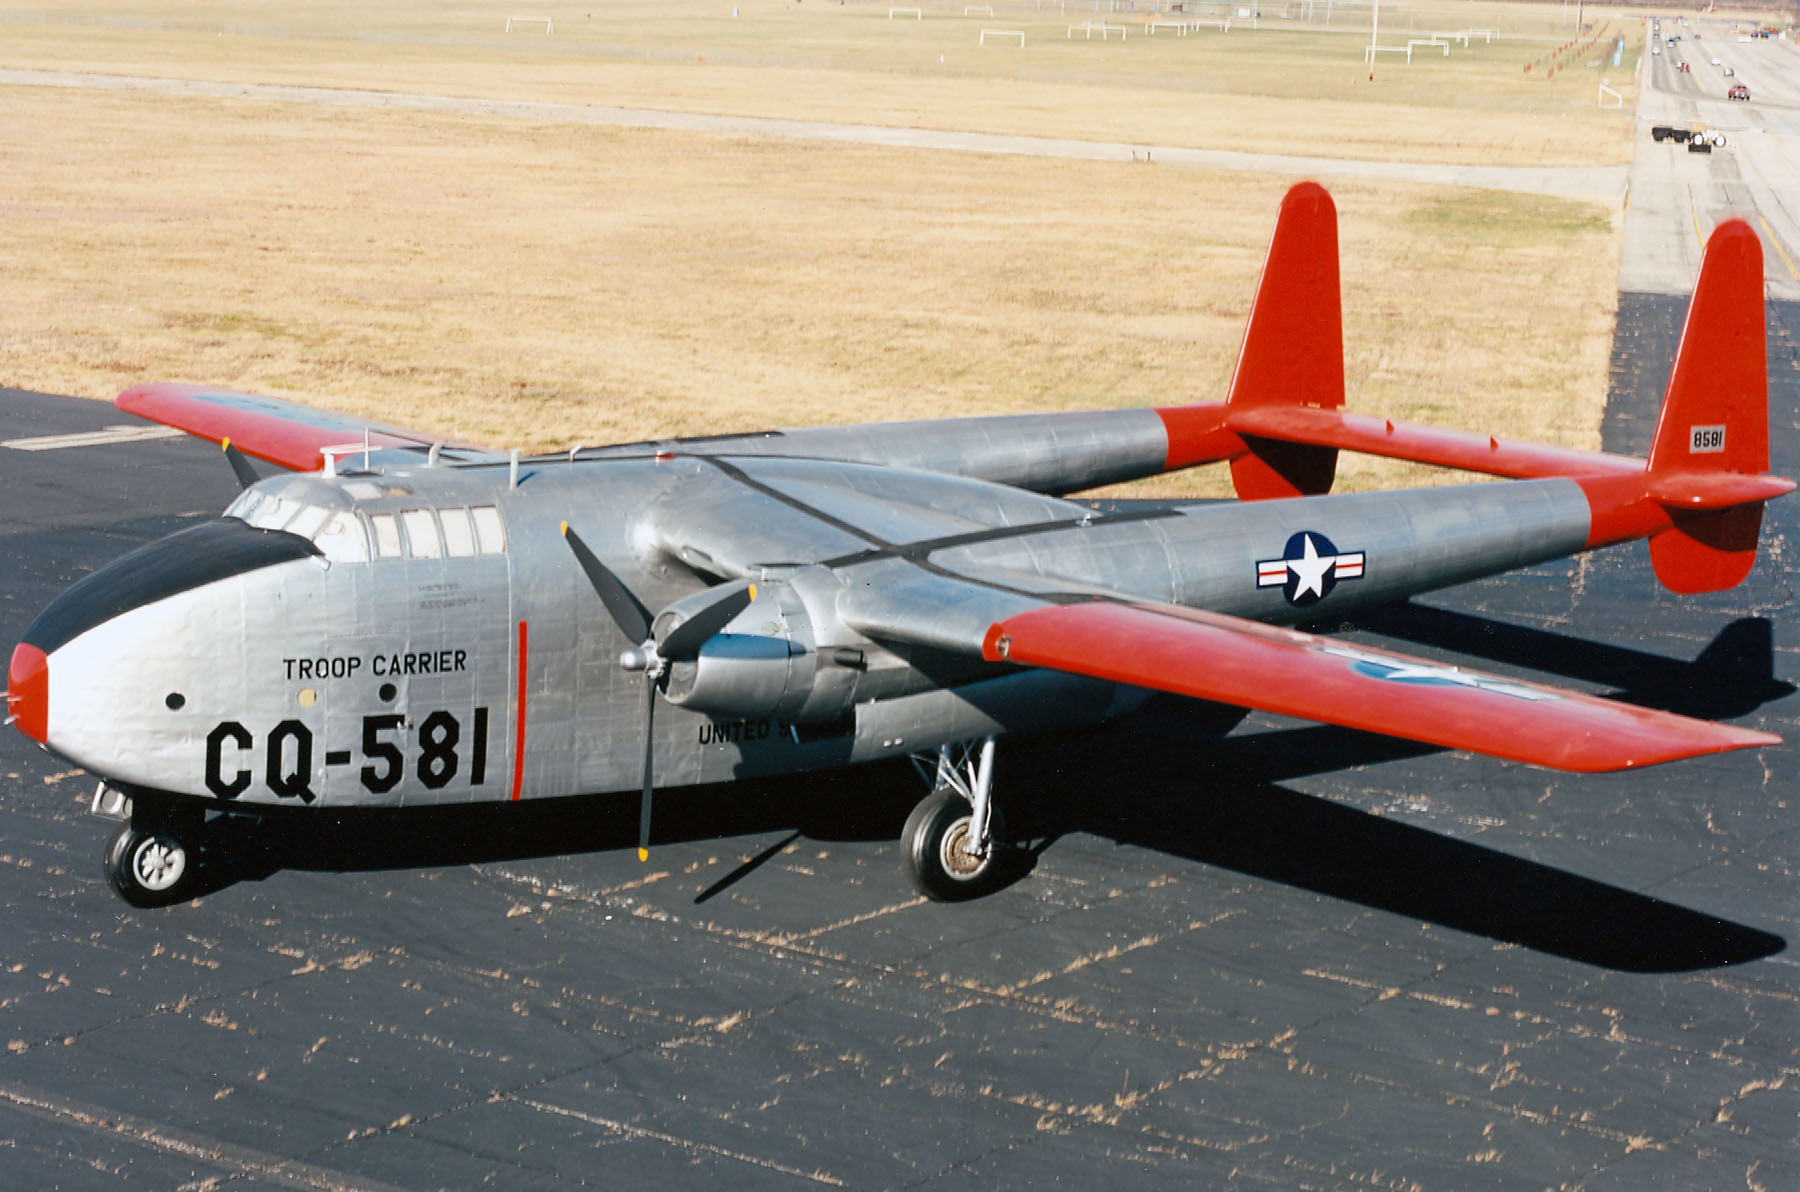 Fairchild C-82 Packet at the National Museum of the United States Air Force